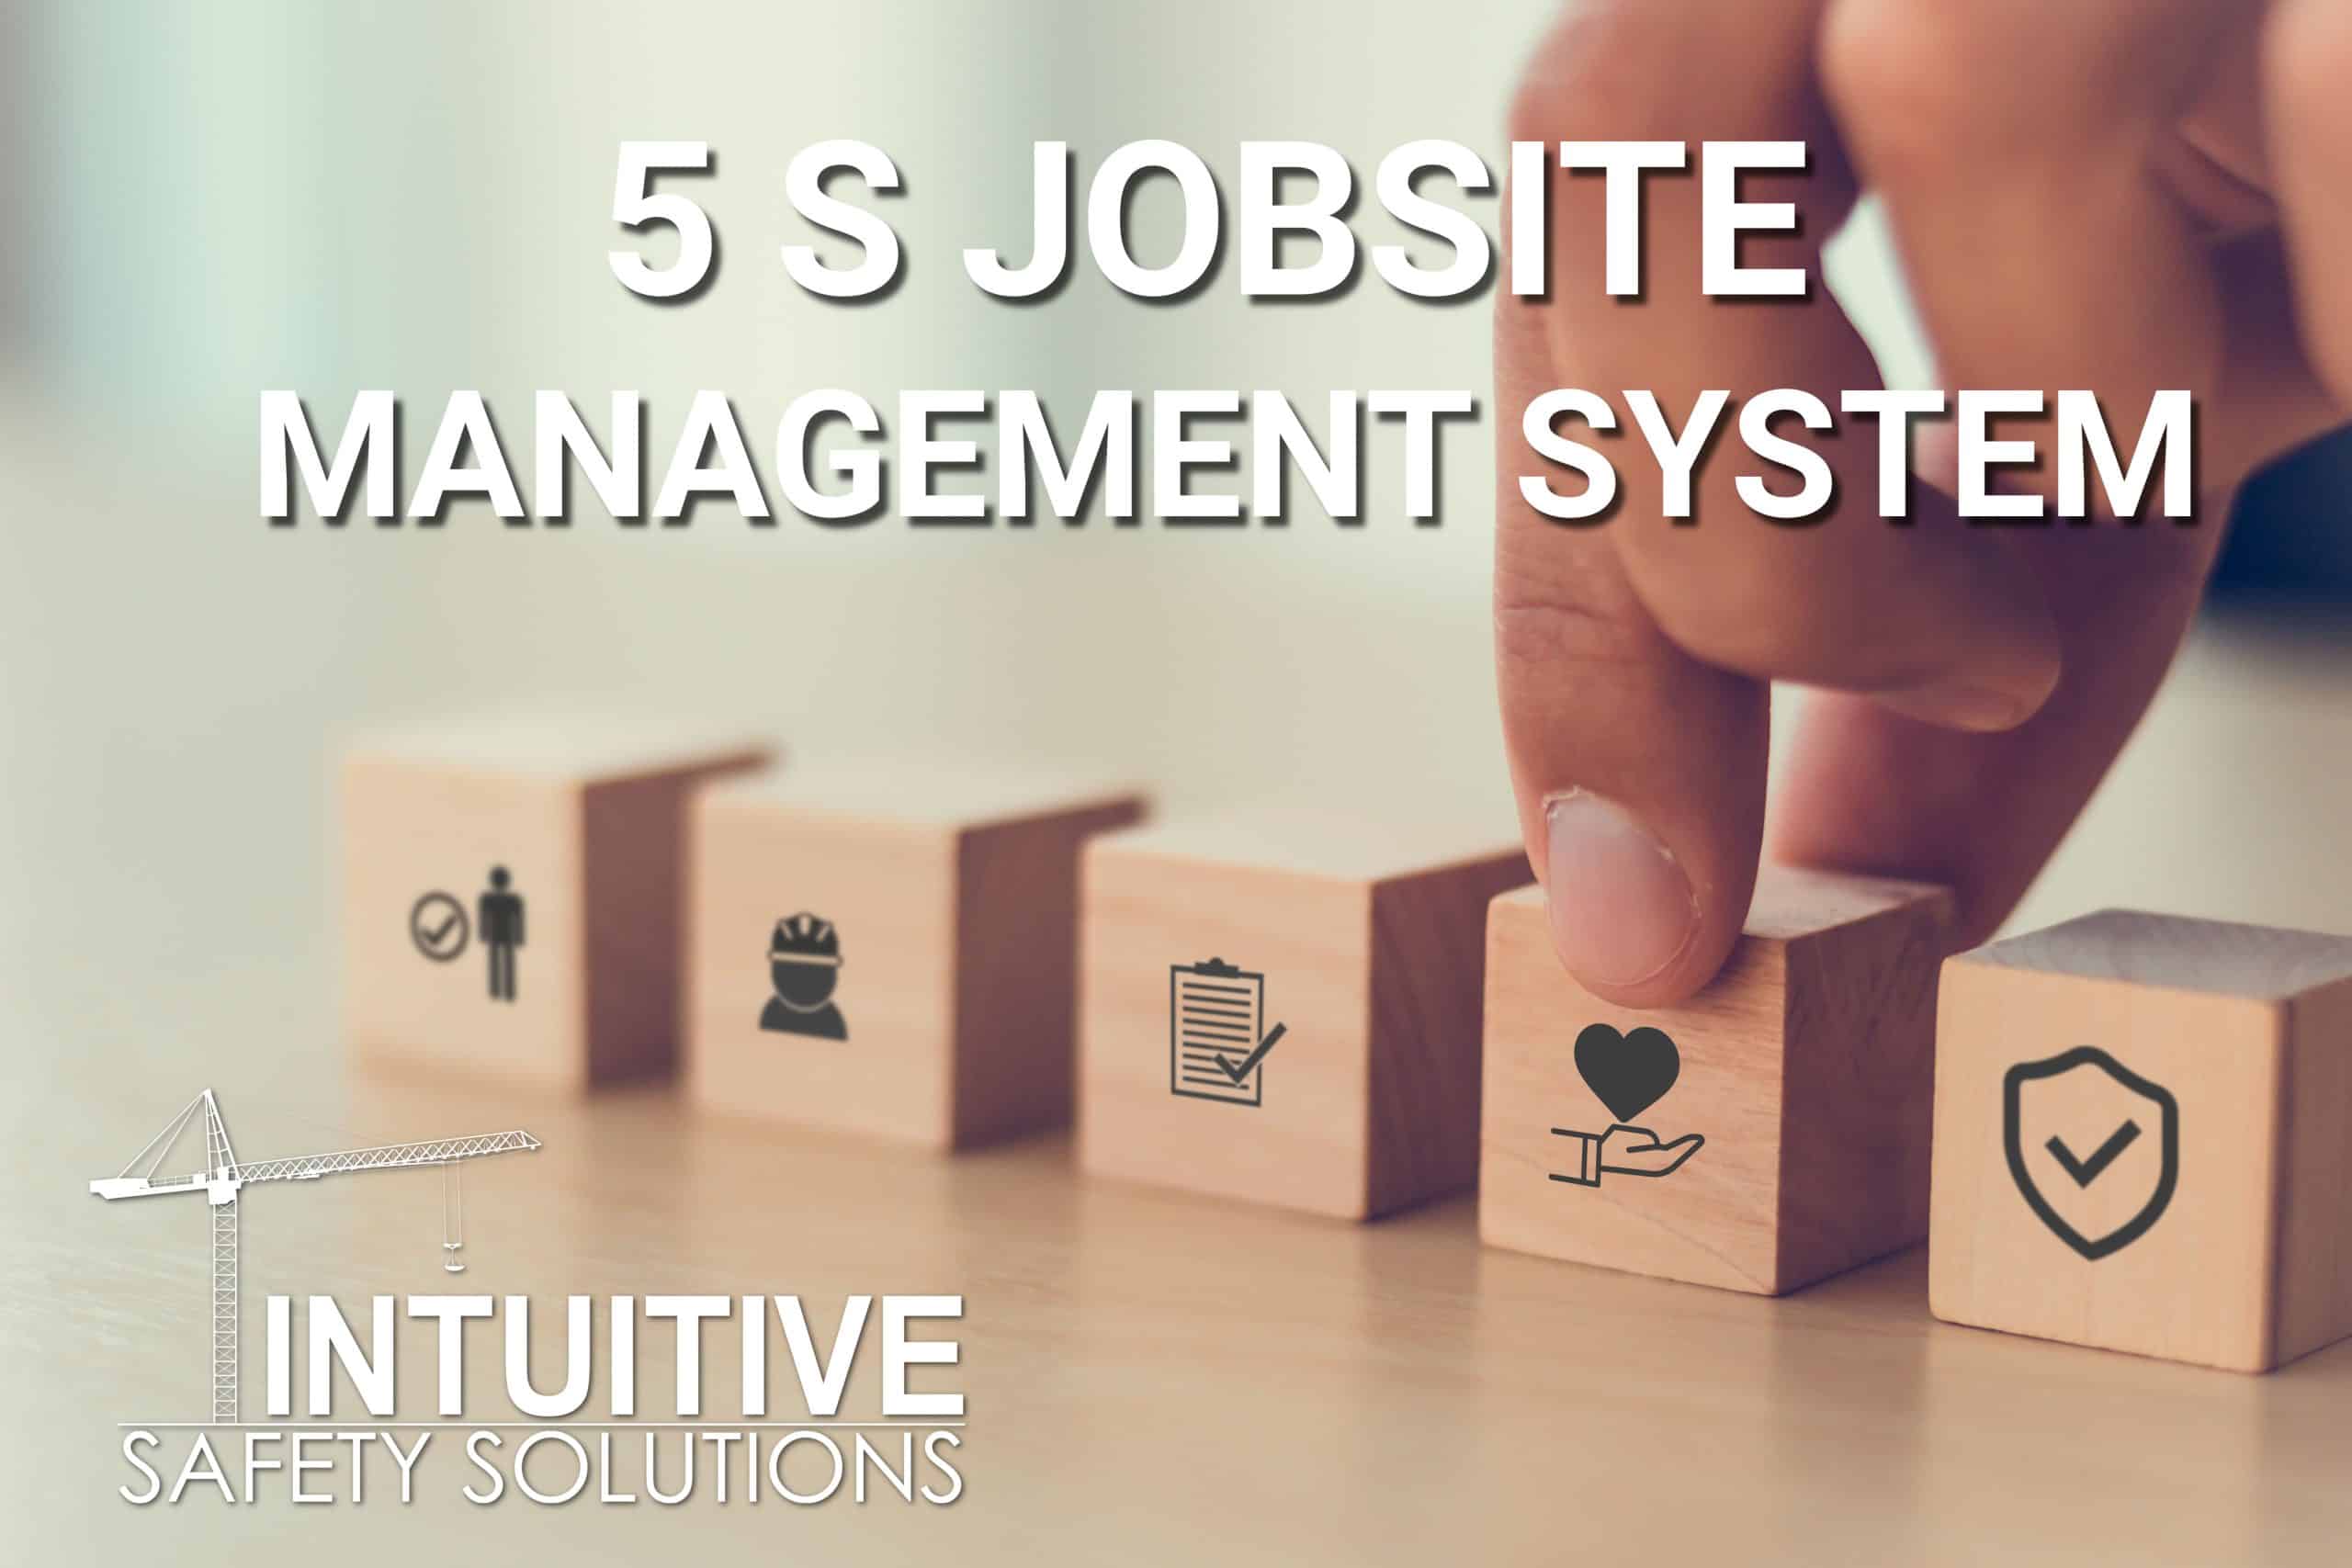 You are currently viewing What’s Up Wednesday – 5 S jobsite management system